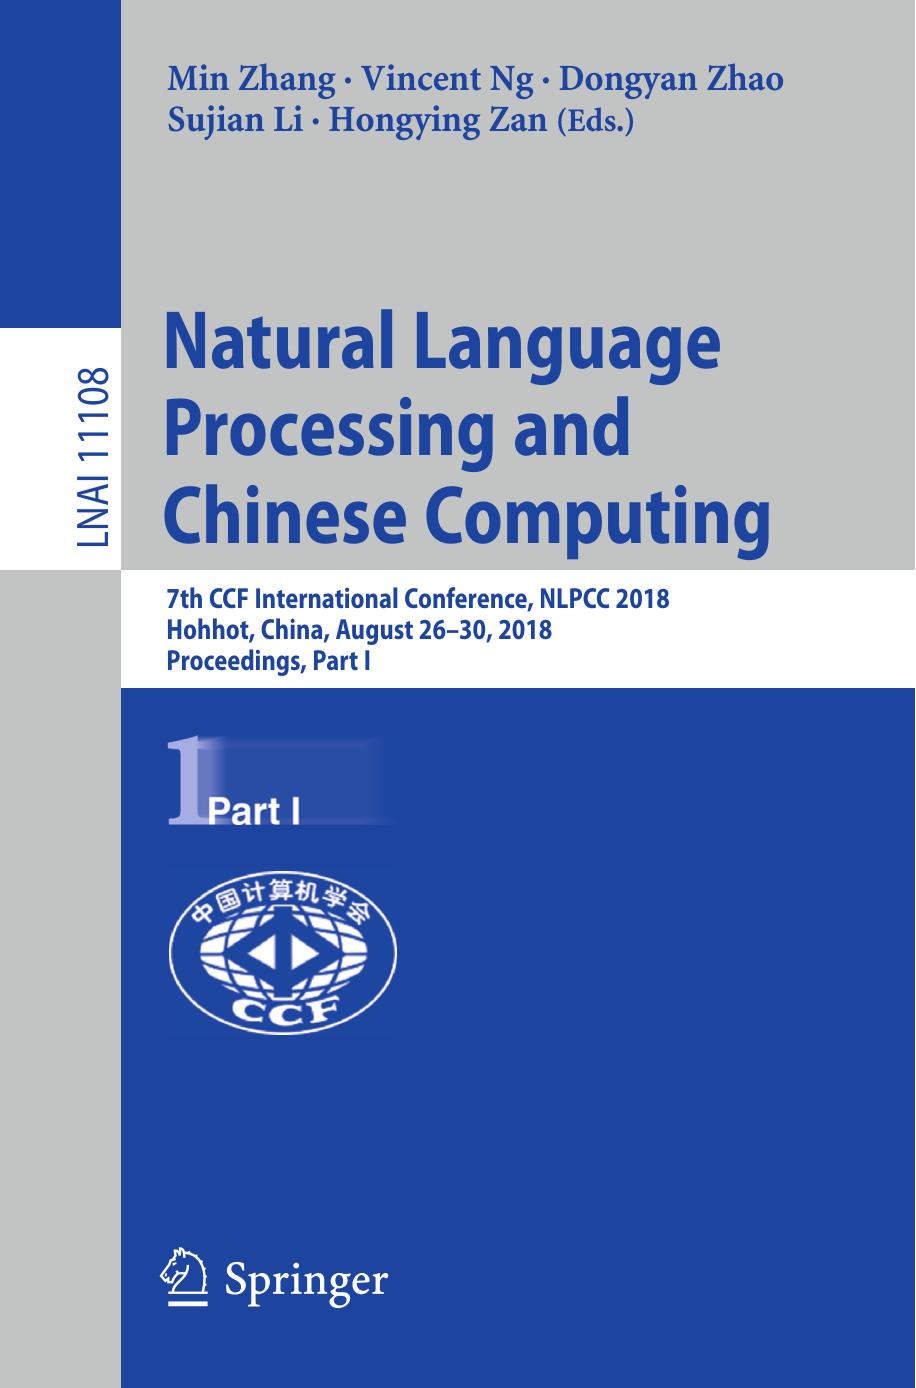 Natural Language Processing and Chinese Computing: 7th CCF International Conference, NLPCC 2018, Hohhot, China, August 26–30, 2018, Proceedings, Part I